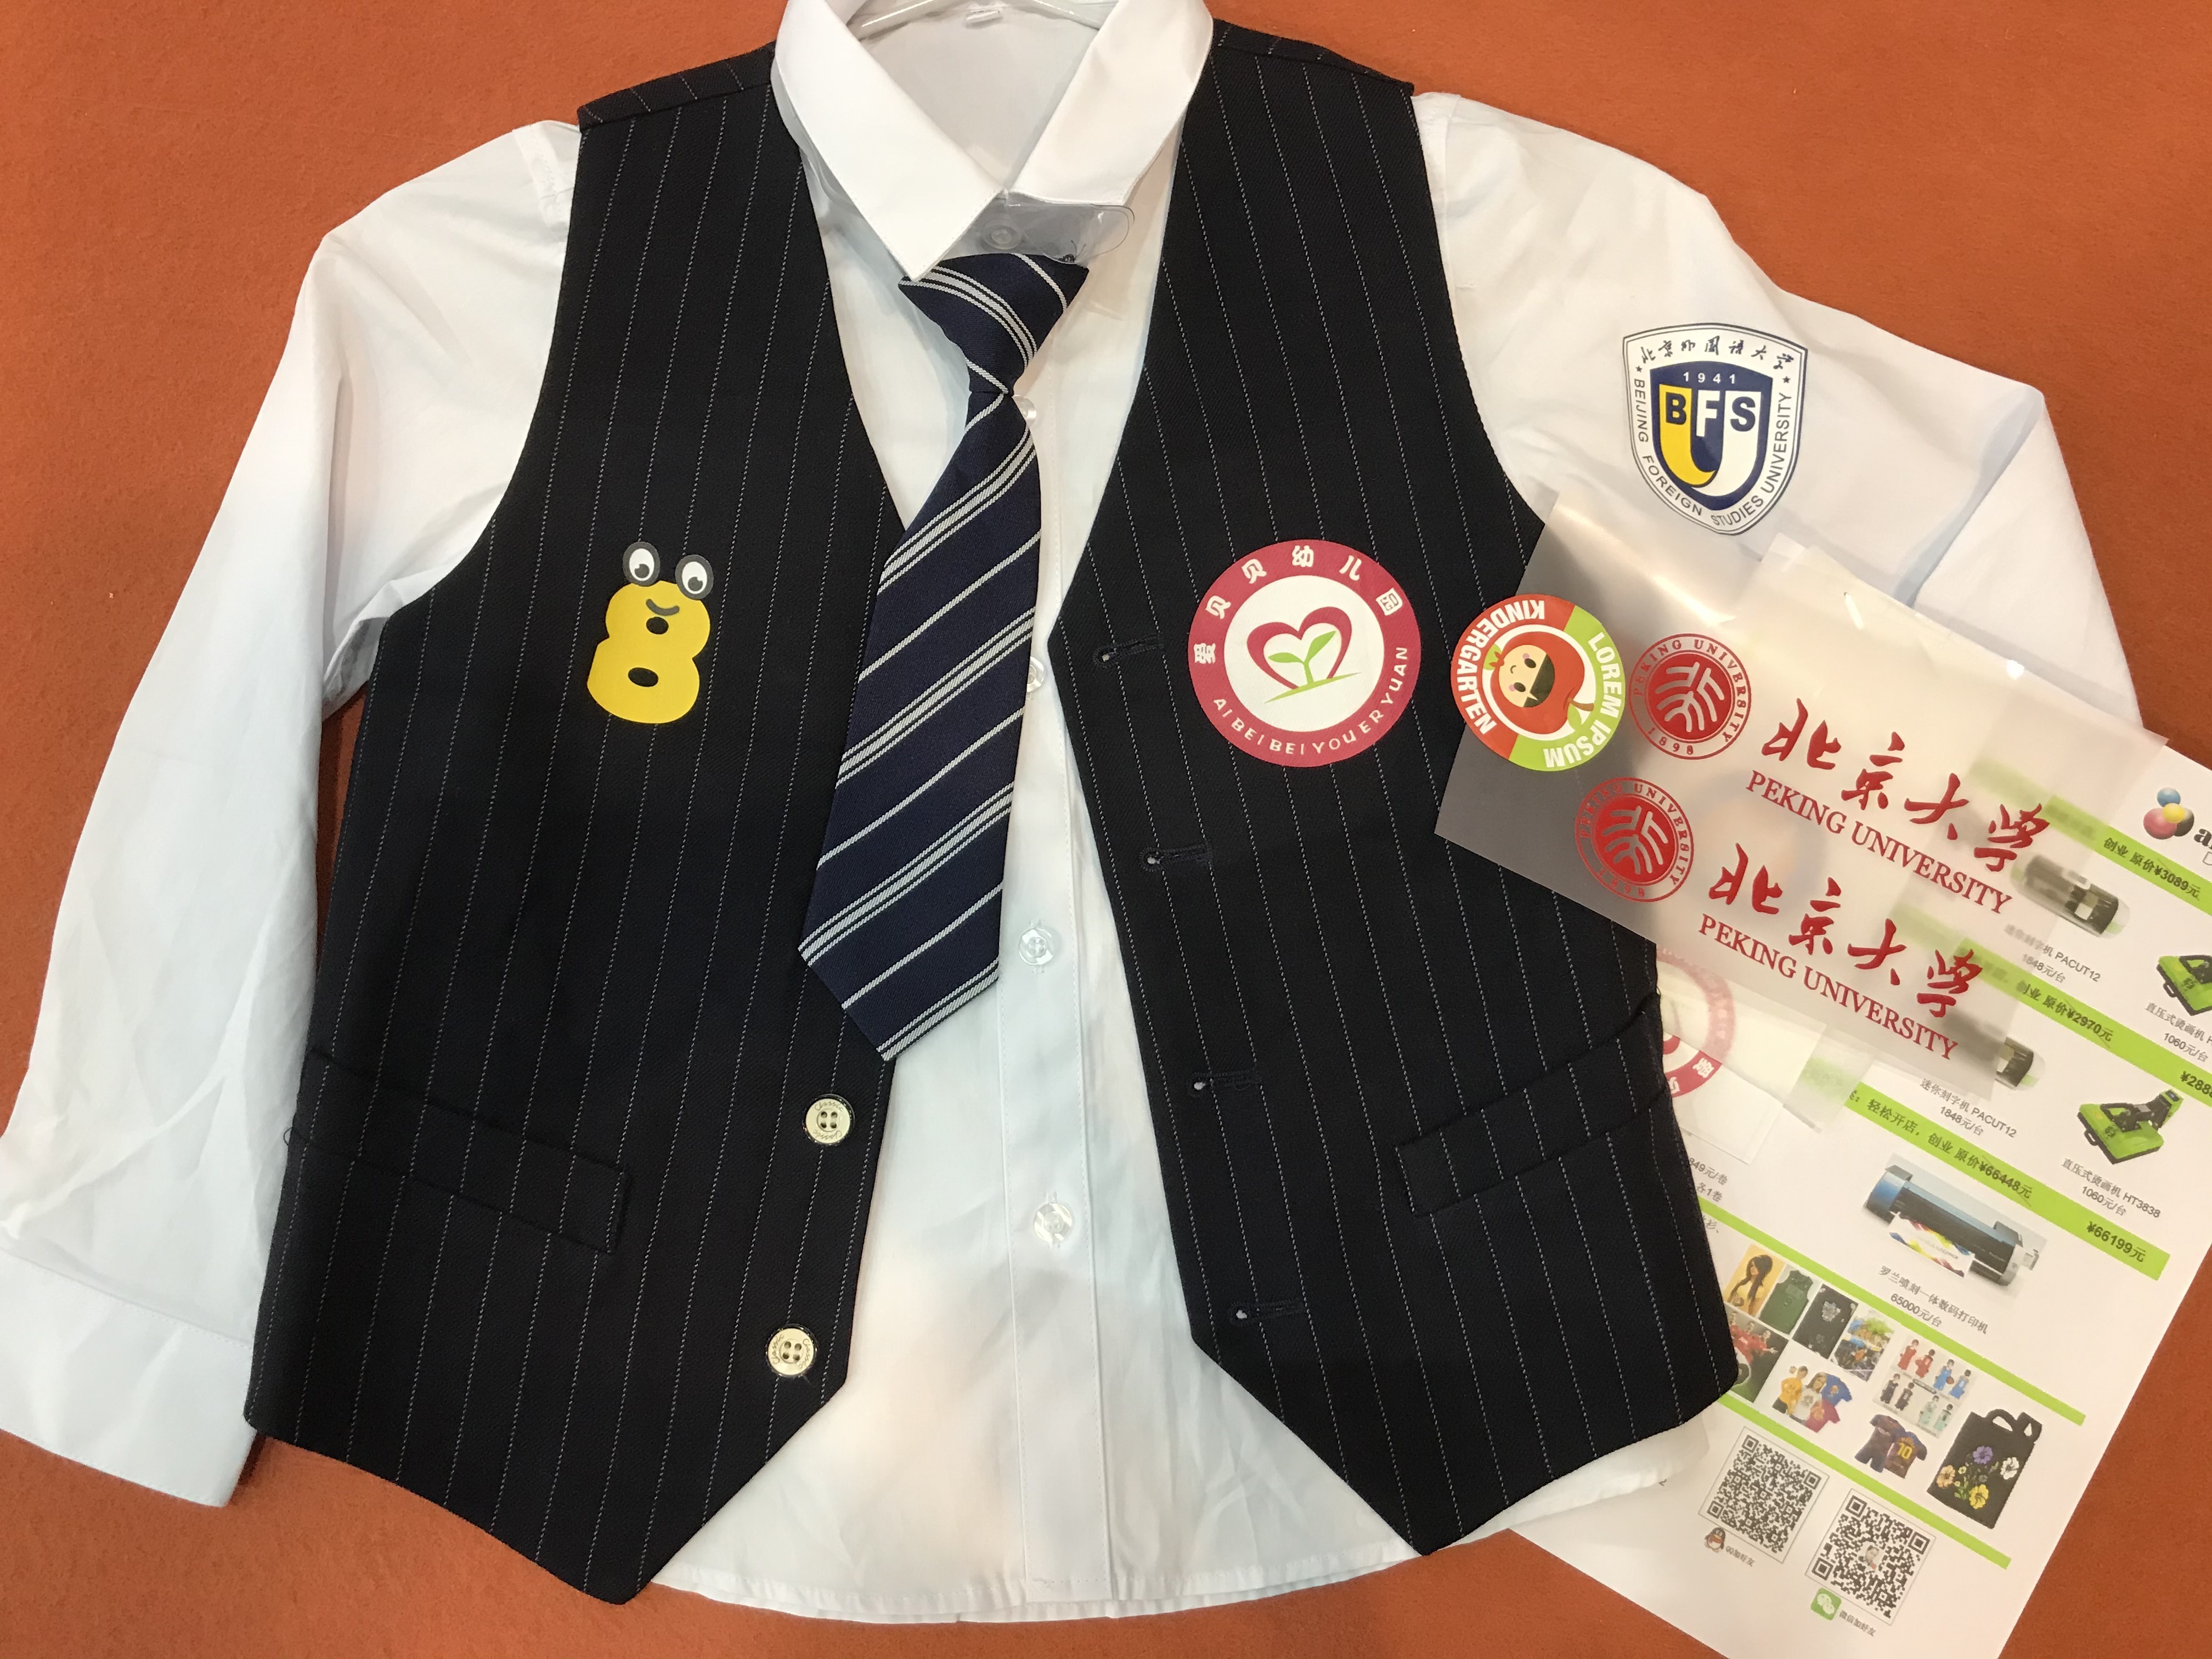 Which investment is best for you to make the logo and numbers of School and Garden Uniforms?